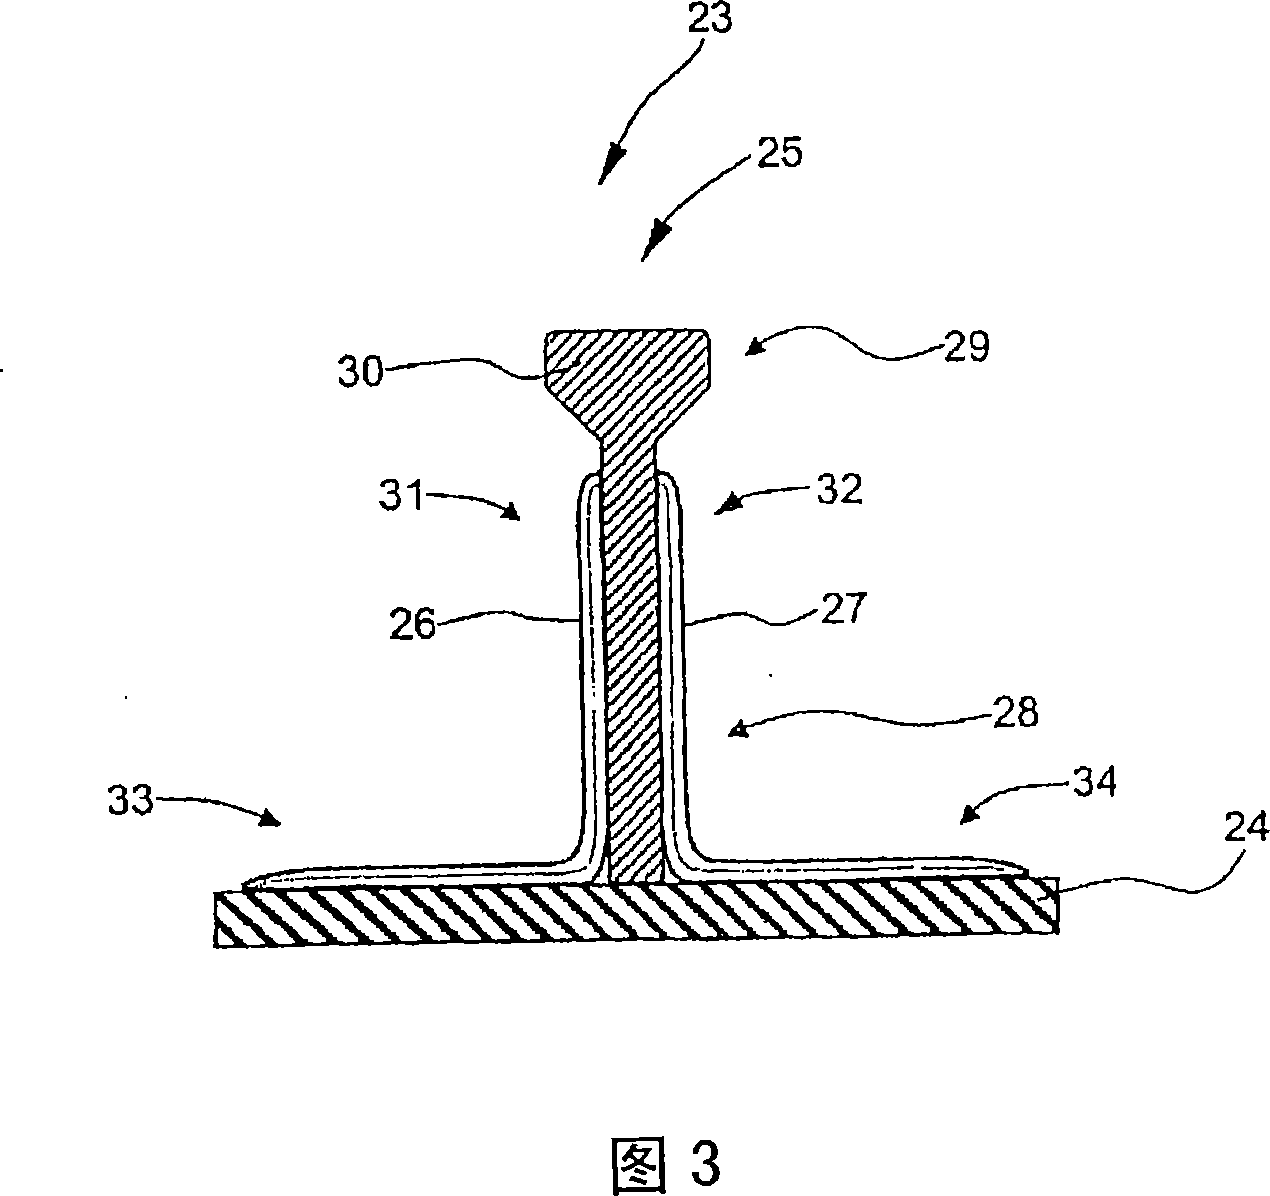 Method for manufacturing a reinforced shell for forming component parts for aircraft and shell for component parts for aircraft